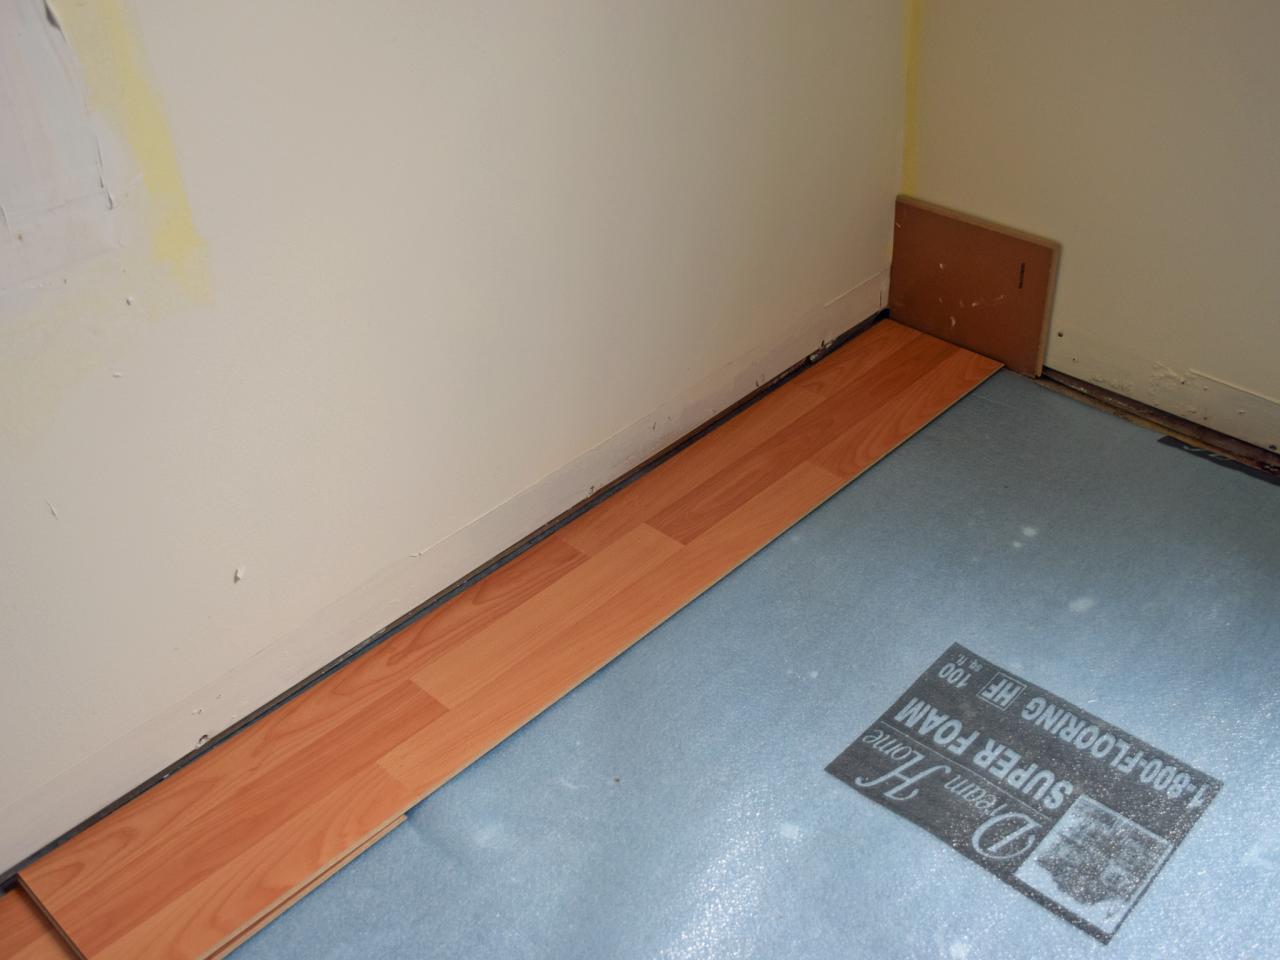 How to Install a Laminate Floor | how-tos | DIY